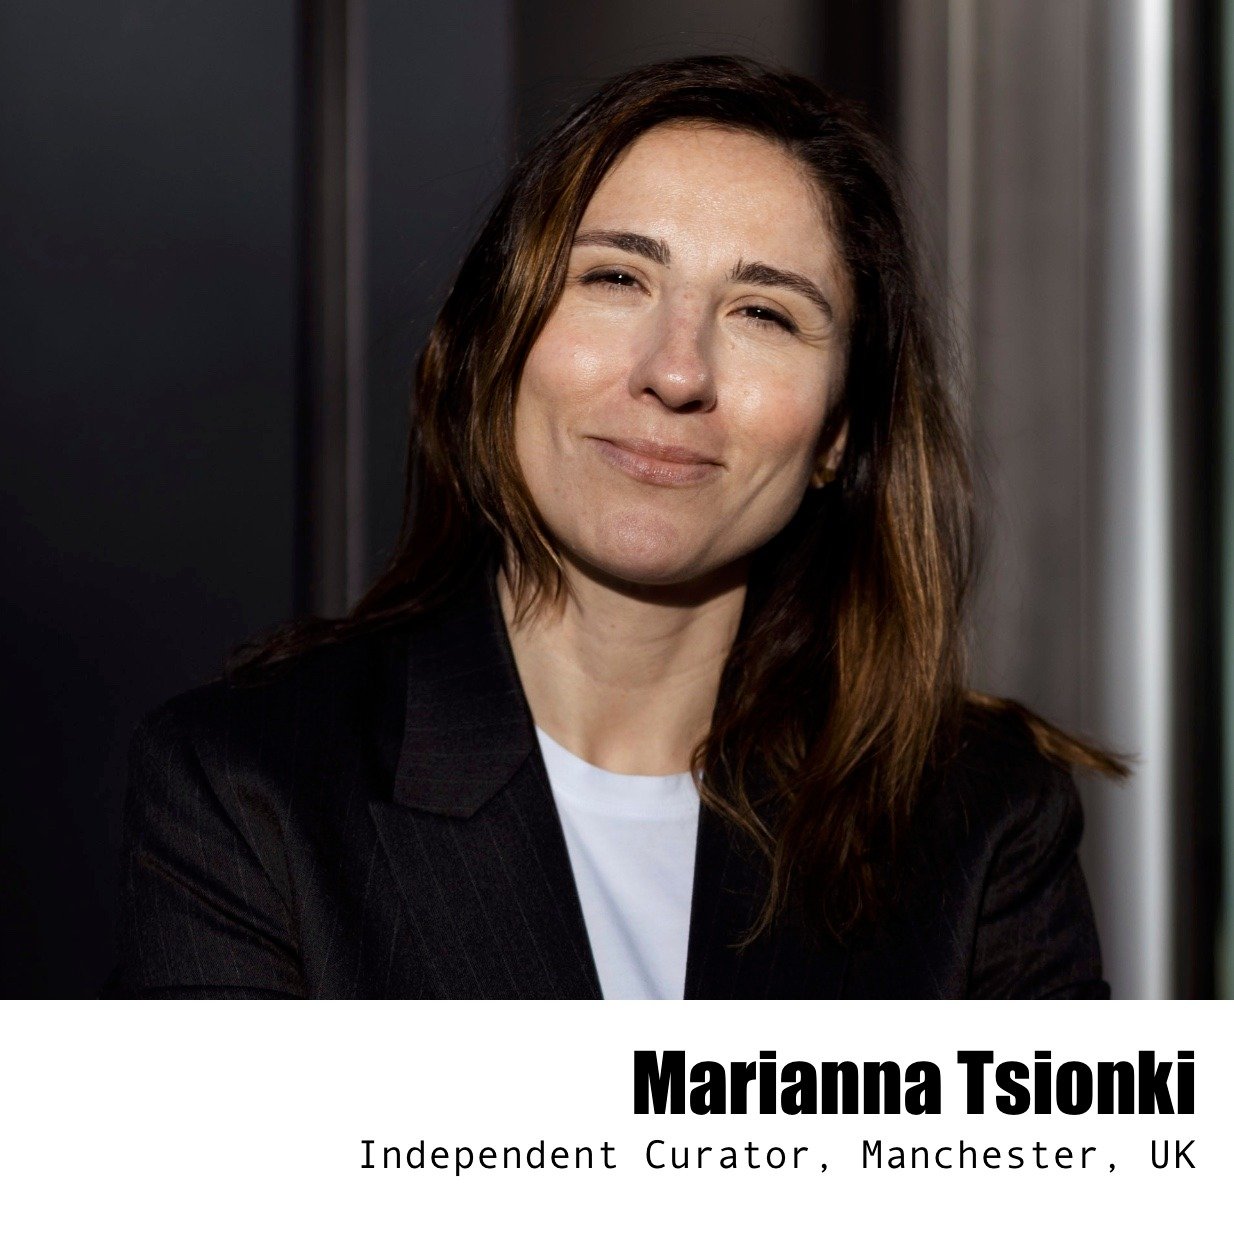 Meet new IKT Member: Marianna Tsionki @marianna.tsionki

Marianna is a curator, researcher and educator working at the intersection of contemporary art and ecology. She is concerned with the role of curatorial and institutional practice in a time of 